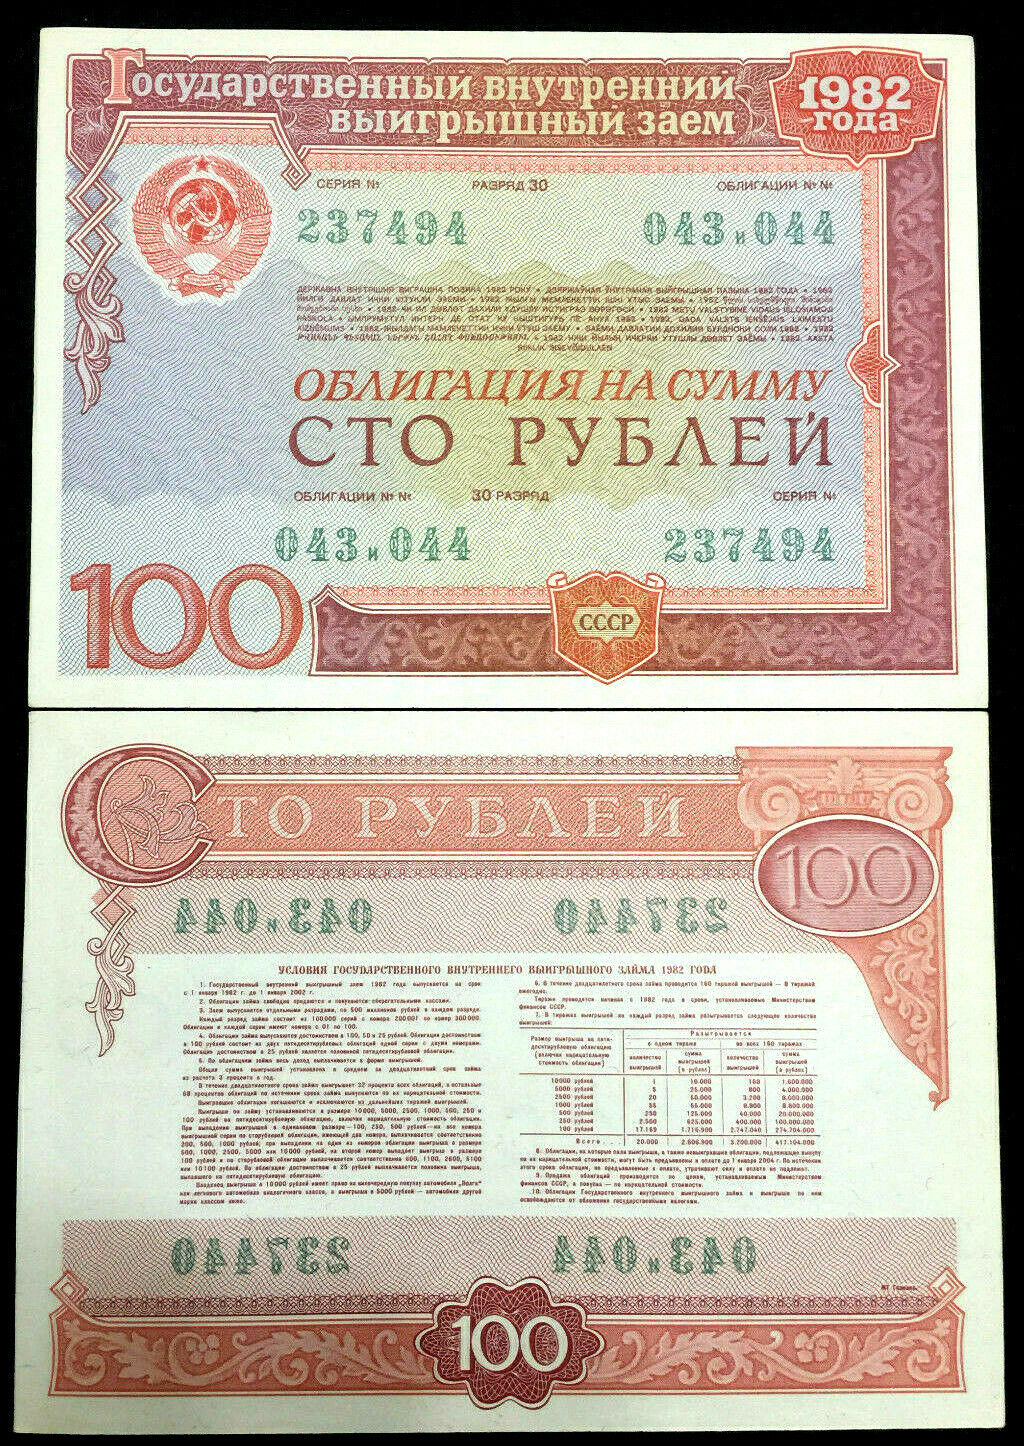 Russia 100 Rubles 1982 Circulated Bond Banknote World Paper Money